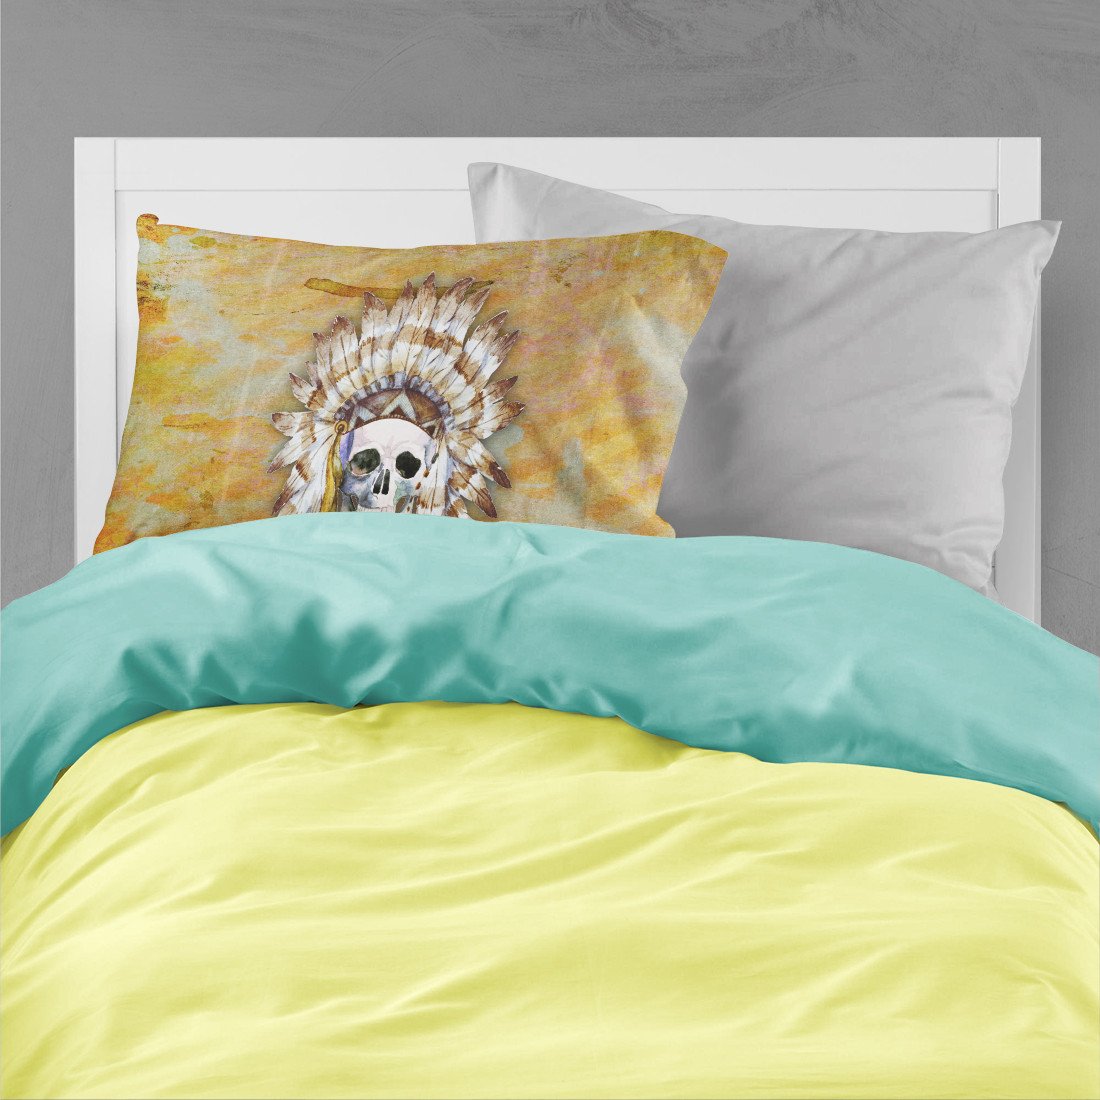 Day of the Dead Indian Skull Fabric Standard Pillowcase BB5121PILLOWCASE by Caroline's Treasures